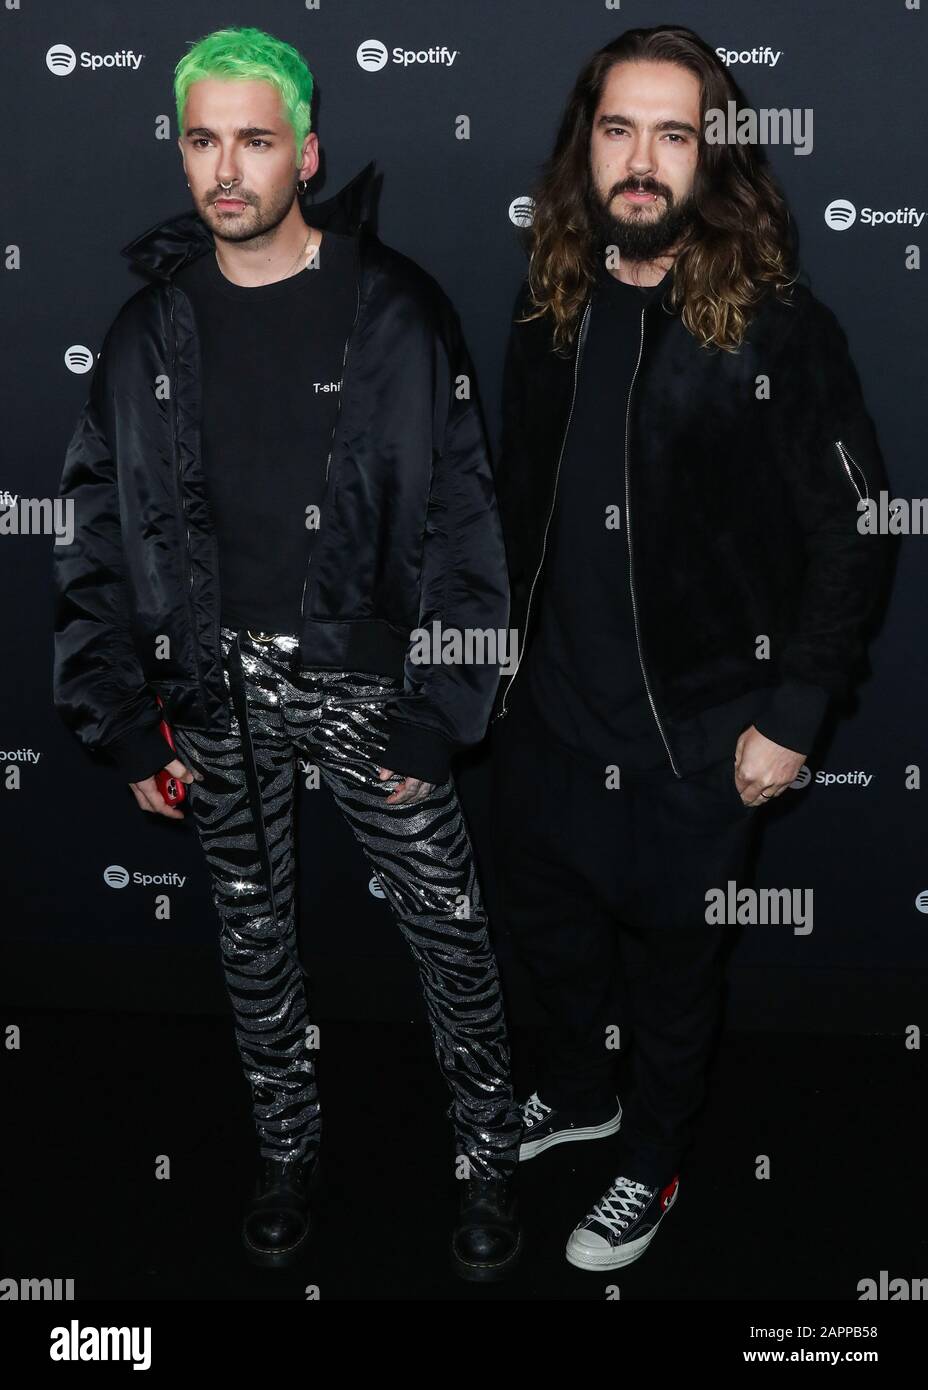 WEST HOLLYWOOD, LOS ANGELES, CALIFORNIA, USA - JANUARY 23: Bill Kaulitz and Tom Kaulitz of Tokio Hotel arrive at the Spotify Best New Artist 2020 Party held at The Lot Studios on January 23, 2020 in West Hollywood, Los Angeles, California, United States. (Photo by Xavier Collin/Image Press Agency) Stock Photo